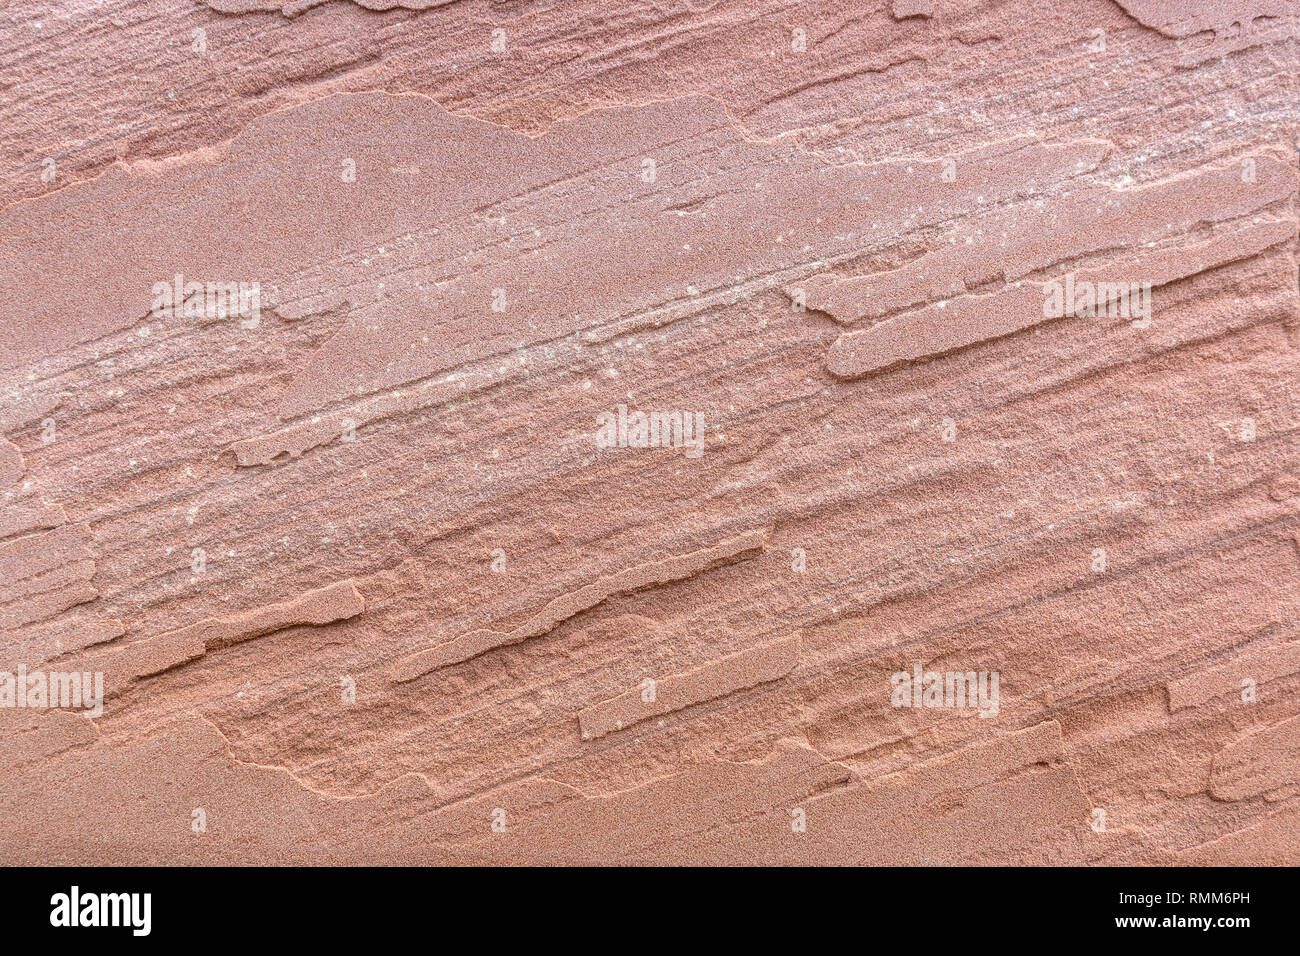 Red sandstone with diagonal texture Stock Photo